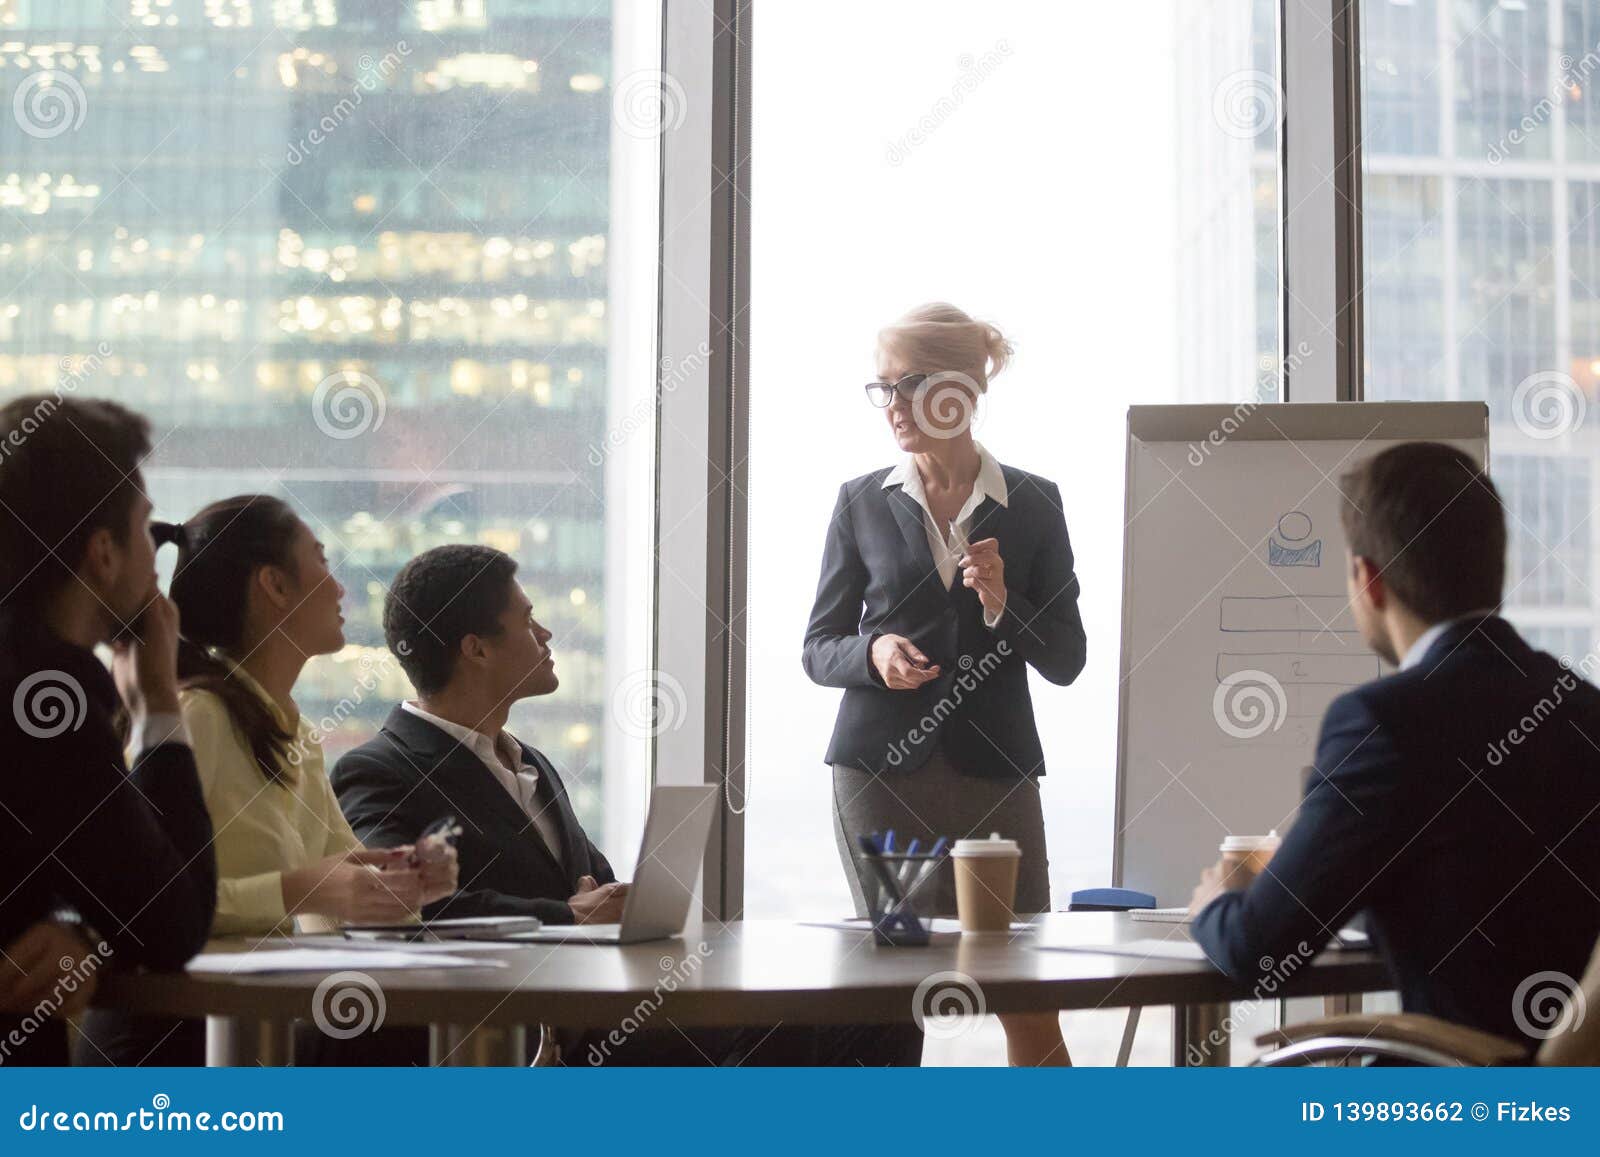 middle-aged executive give presentation lecture for diverse corporate team